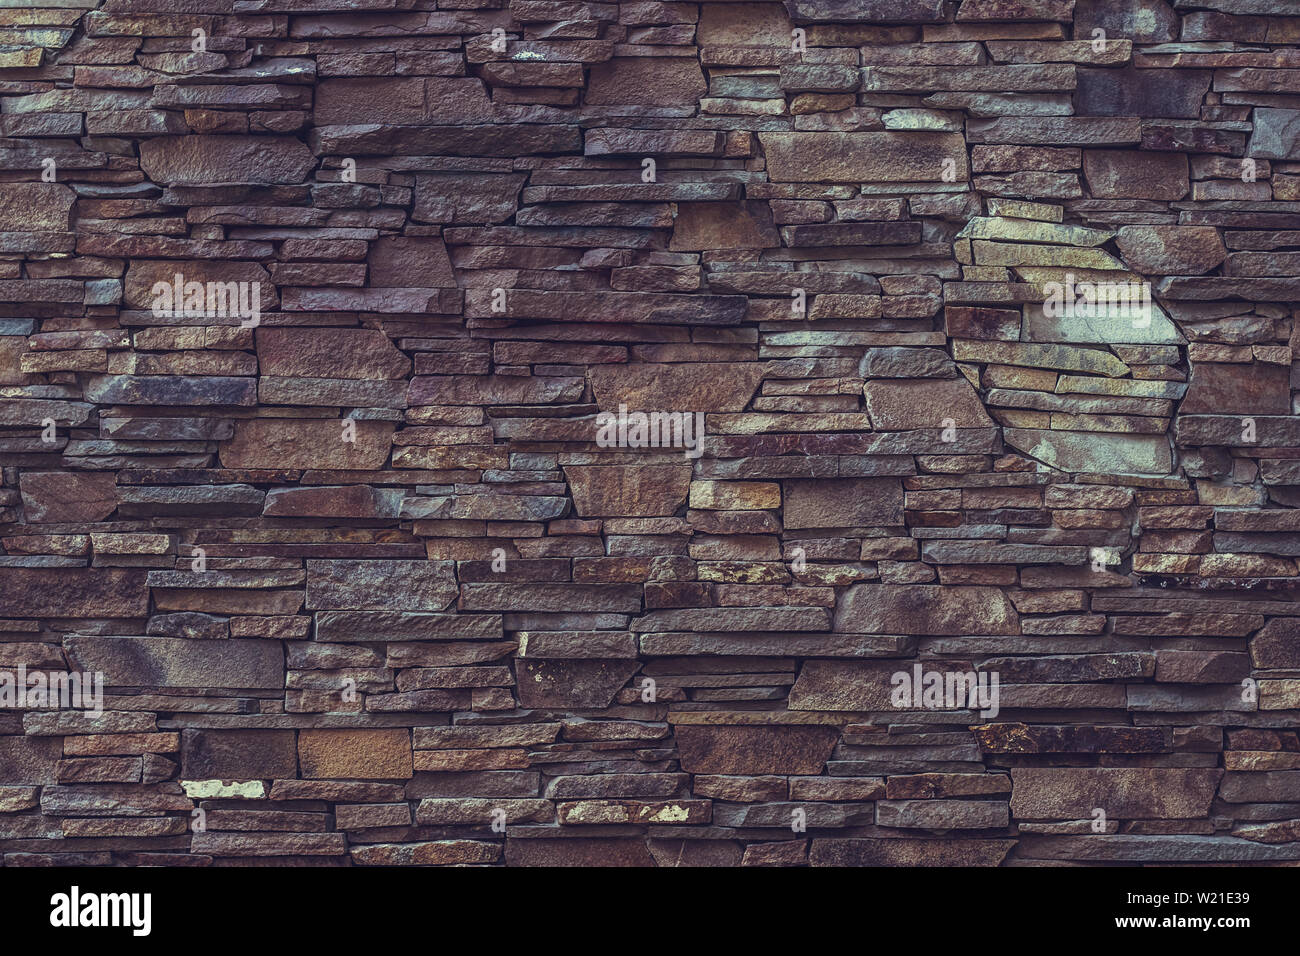 Old brick wall background. Dark brown rough stone wall. Rock wall surface. Stony texture. Grunge material background. Pattern of decorative tile. Ston Stock Photo